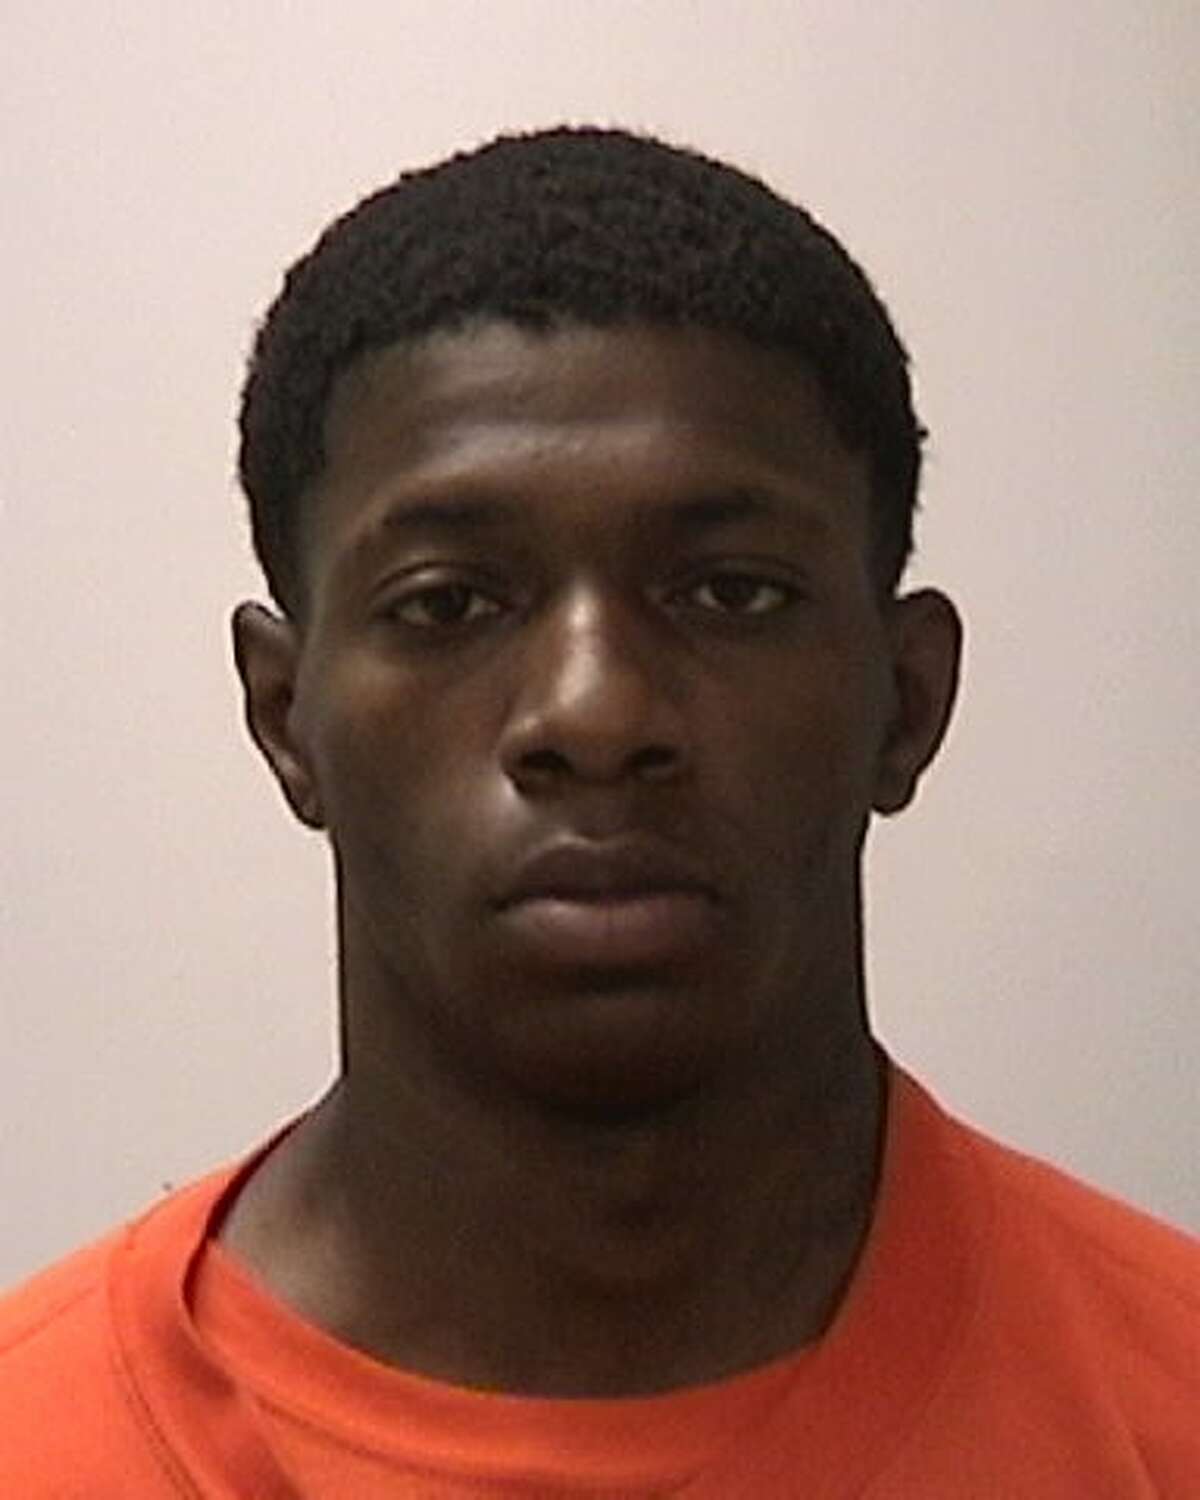 Pravin Kevin Lal, 20, of Marin City, was charged with: robbery, conspiracy, possession of stolen property and firearms charges  in connection with an alleged armed robbery in San Francisco's Russian Hill on June, 25, 2016. 